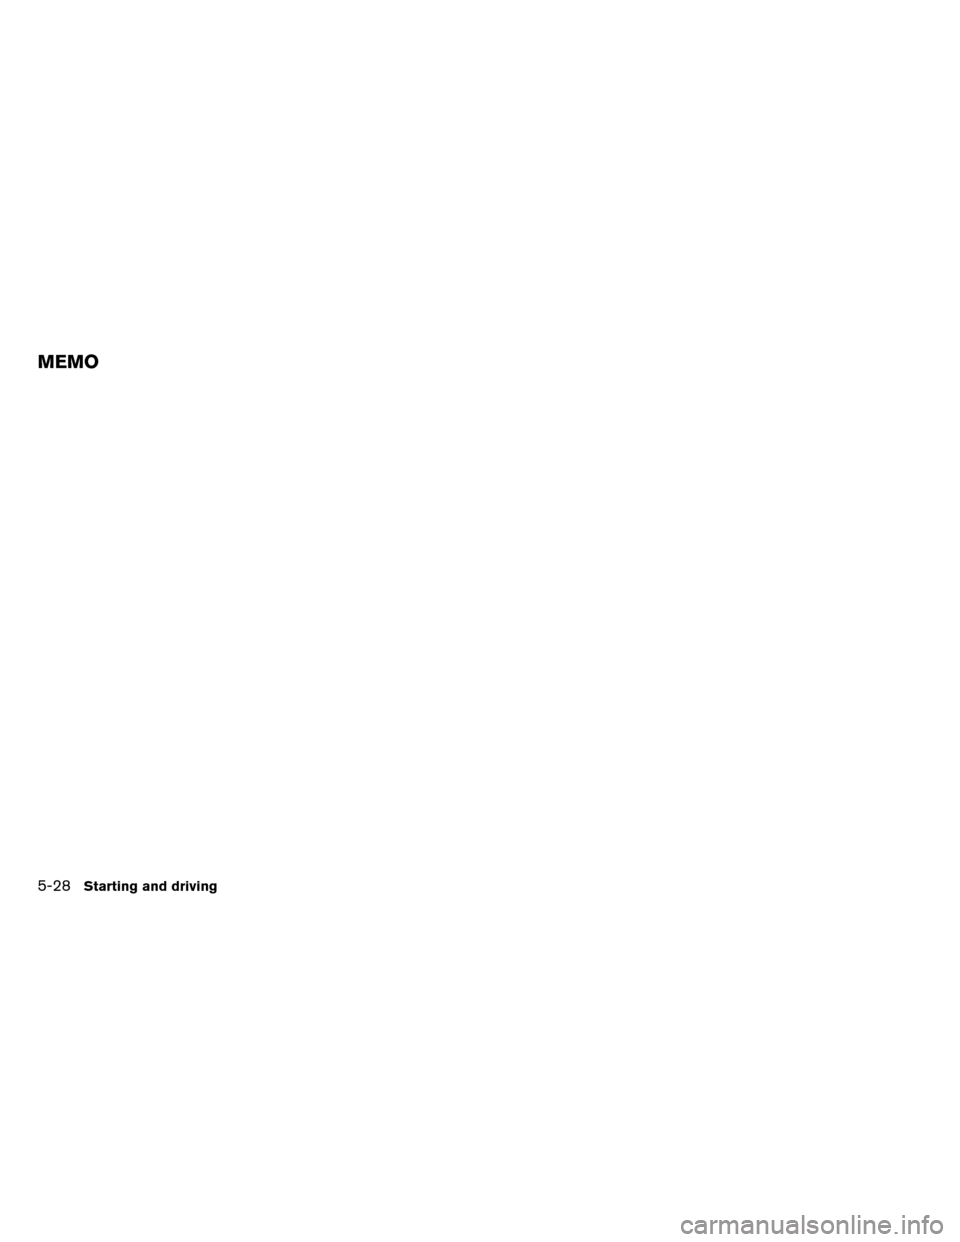 NISSAN ALTIMA COUPE 2013 D32 / 4.G Owners Manual MEMO
5-28Starting and driving 